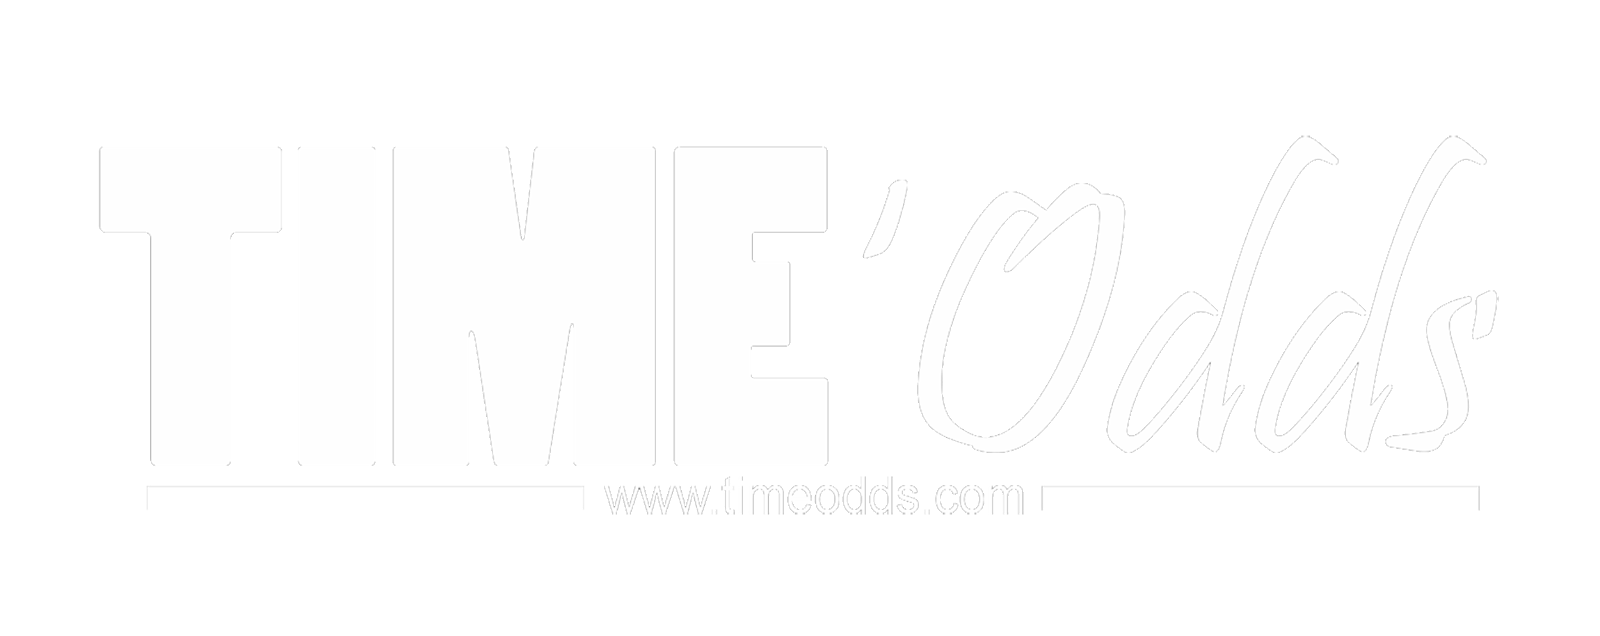 TIME'Odds